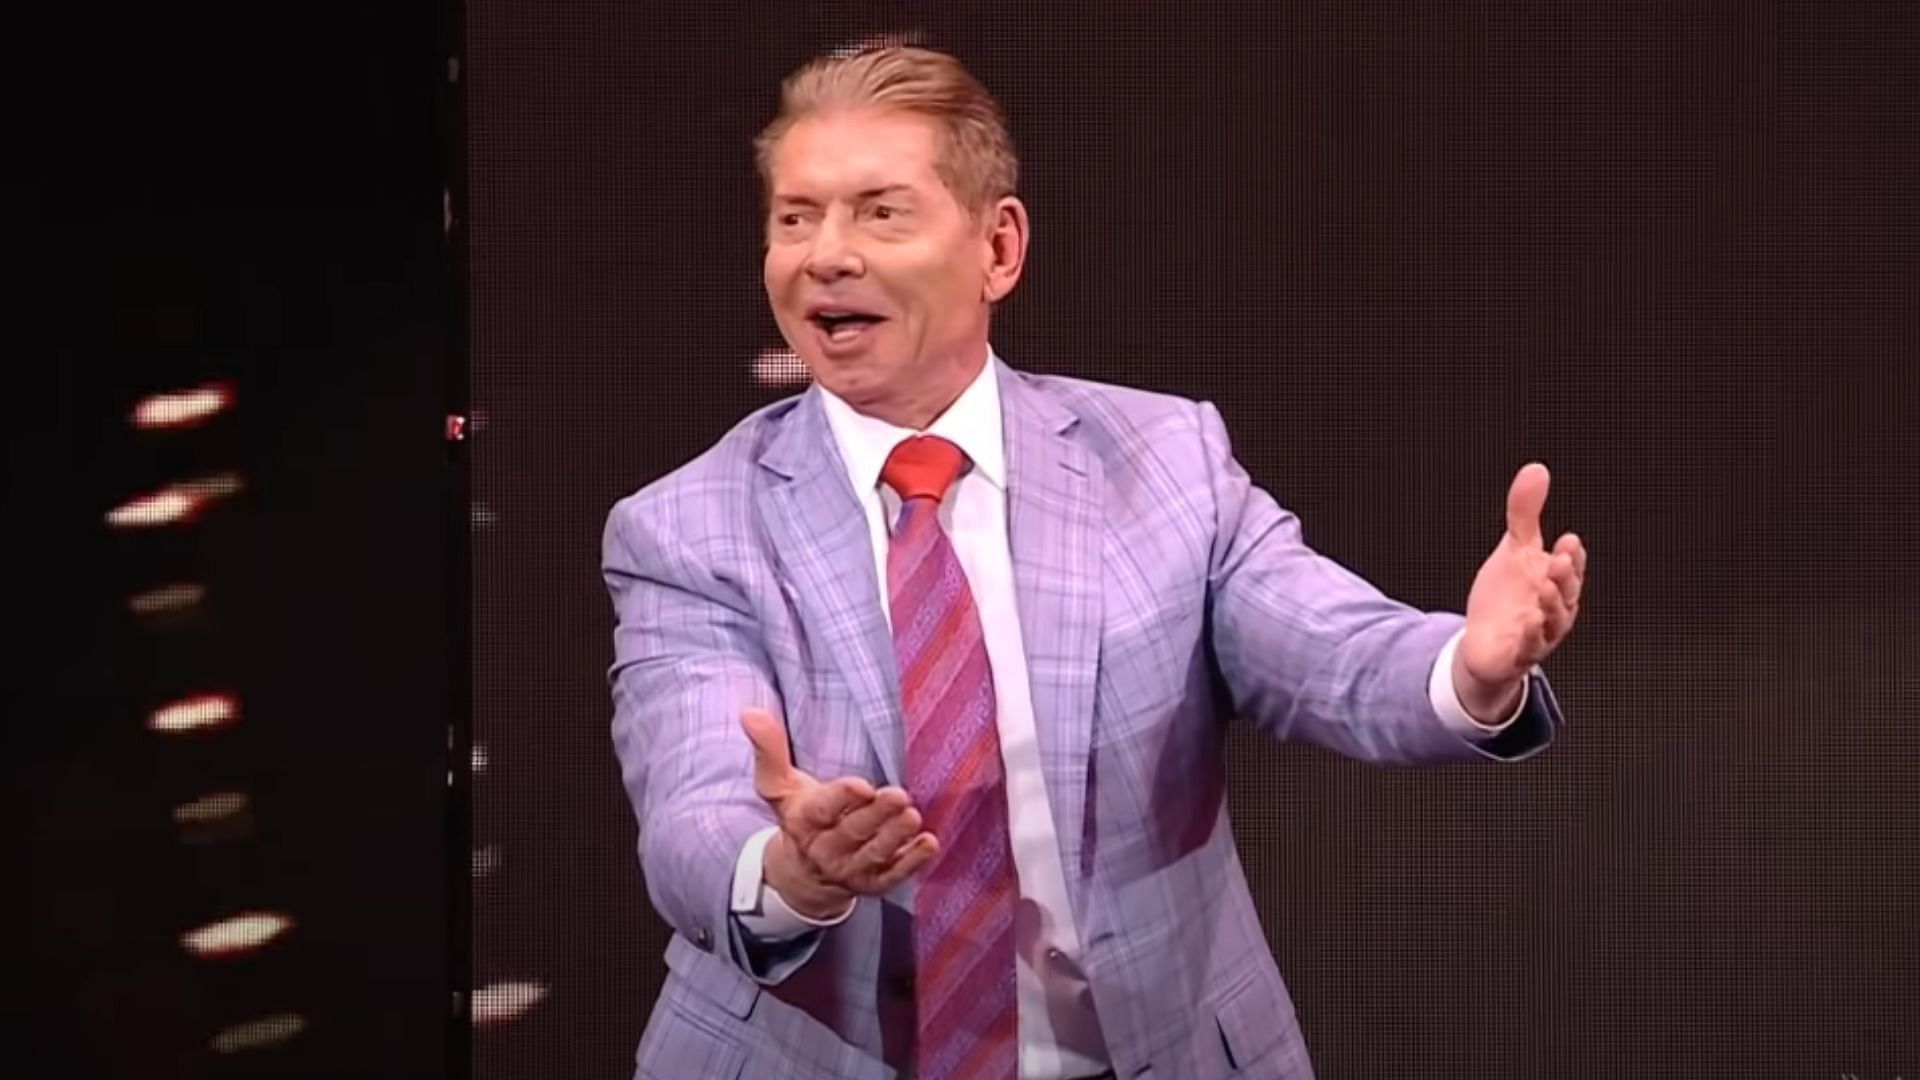 Former WWE Chairman and CEO Vince McMahon